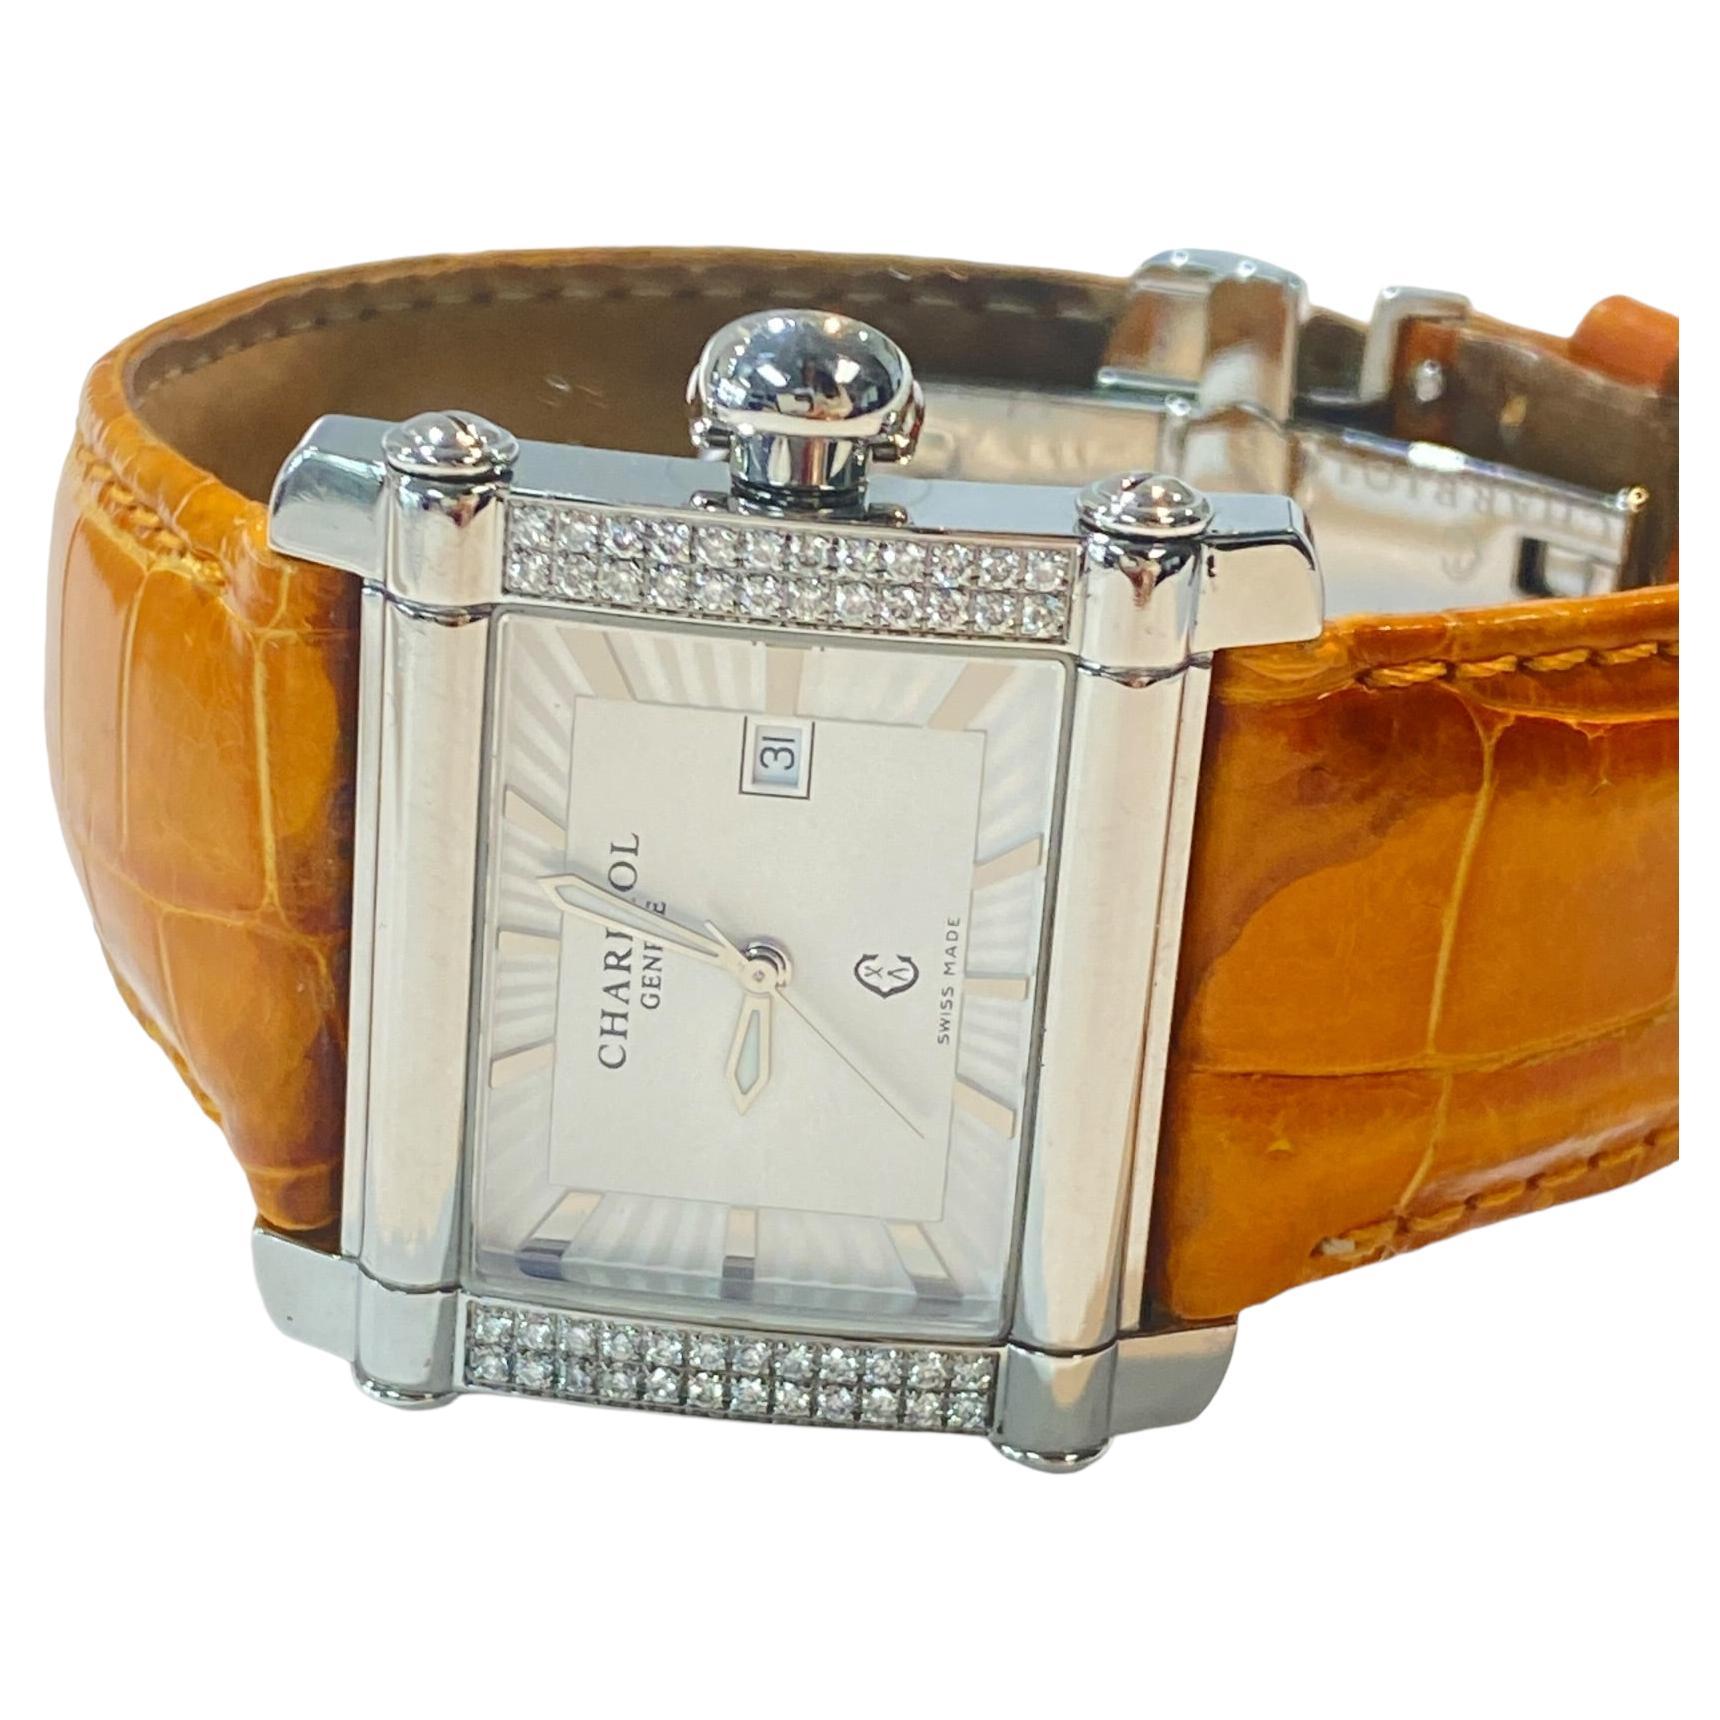 Philippe Charriol Watch - 6 For Sale on 1stDibs | phillipe charriol watch,  philippe charriol watch price, watch philippe charriol